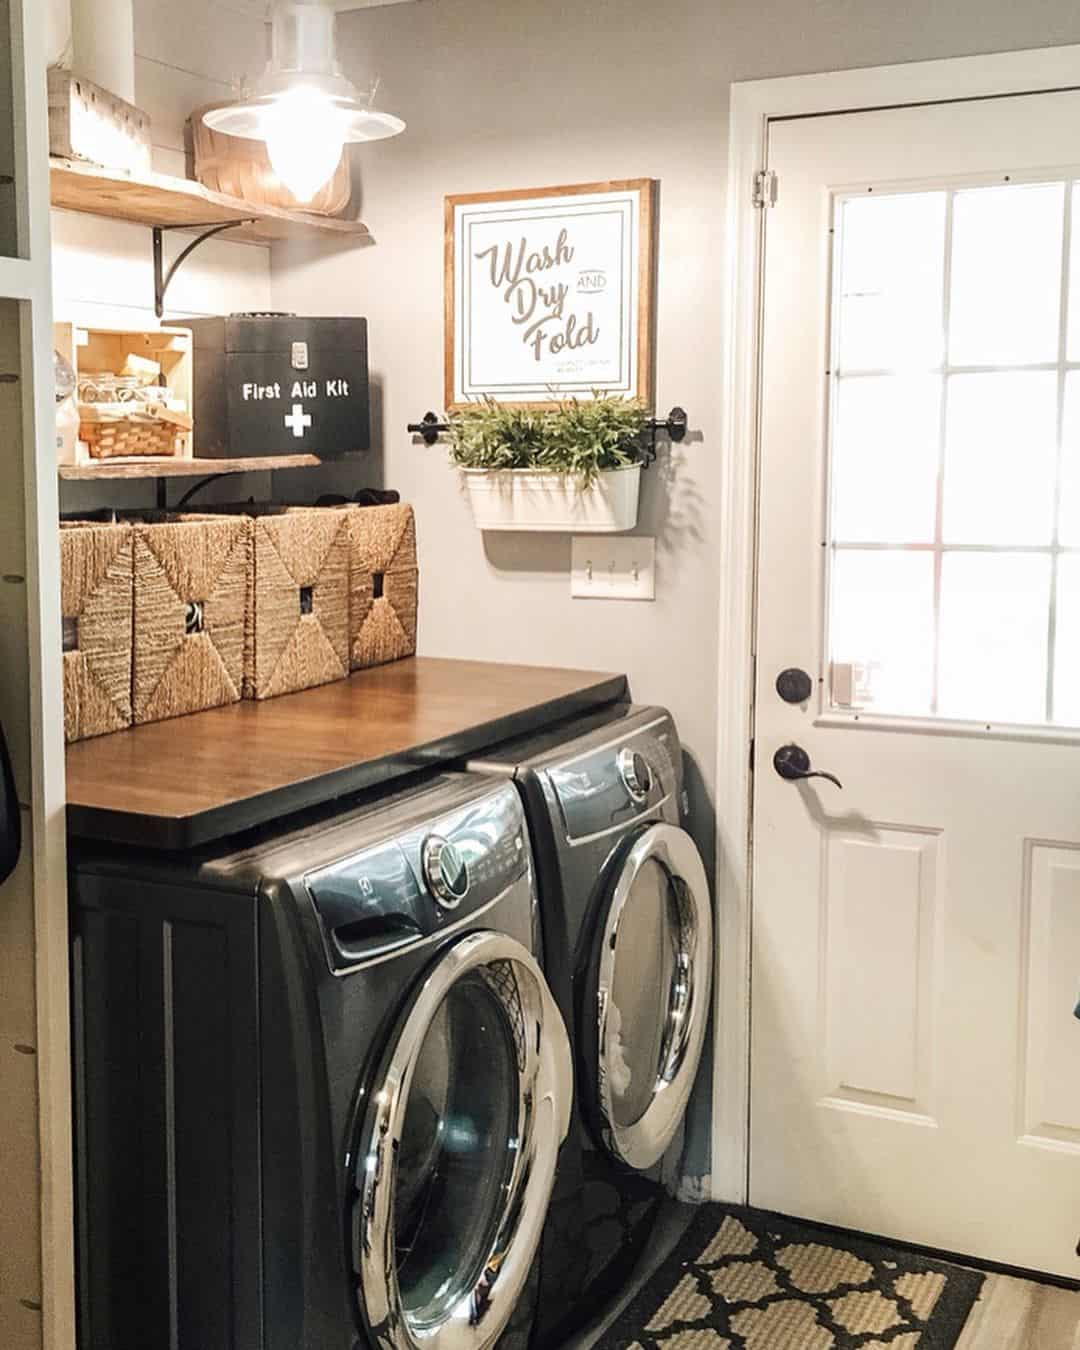 Washer and Dryer Beneath Wooden Countertop - Soul & Lane